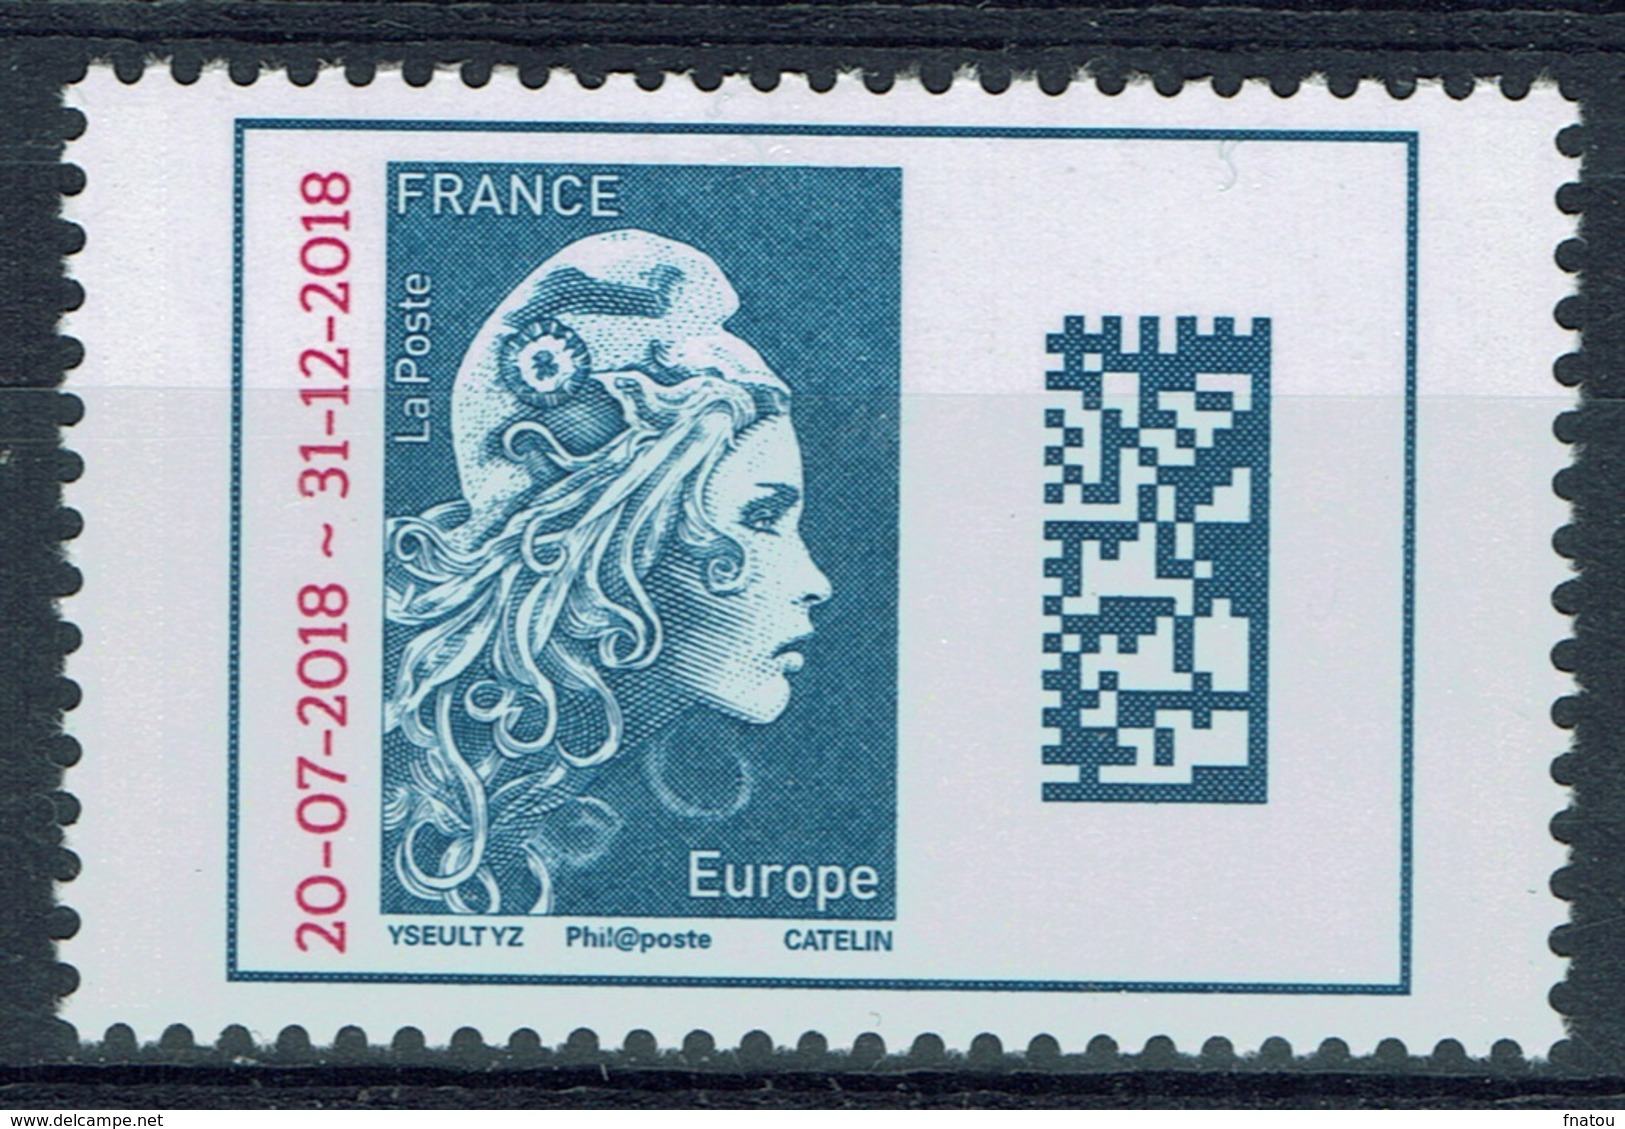 France, Marianne, "l'engagée" (the Engaged), EUROPE, Overprint "20-07-2018 - 31-12-2018", 2018, MNH VF - Ungebraucht